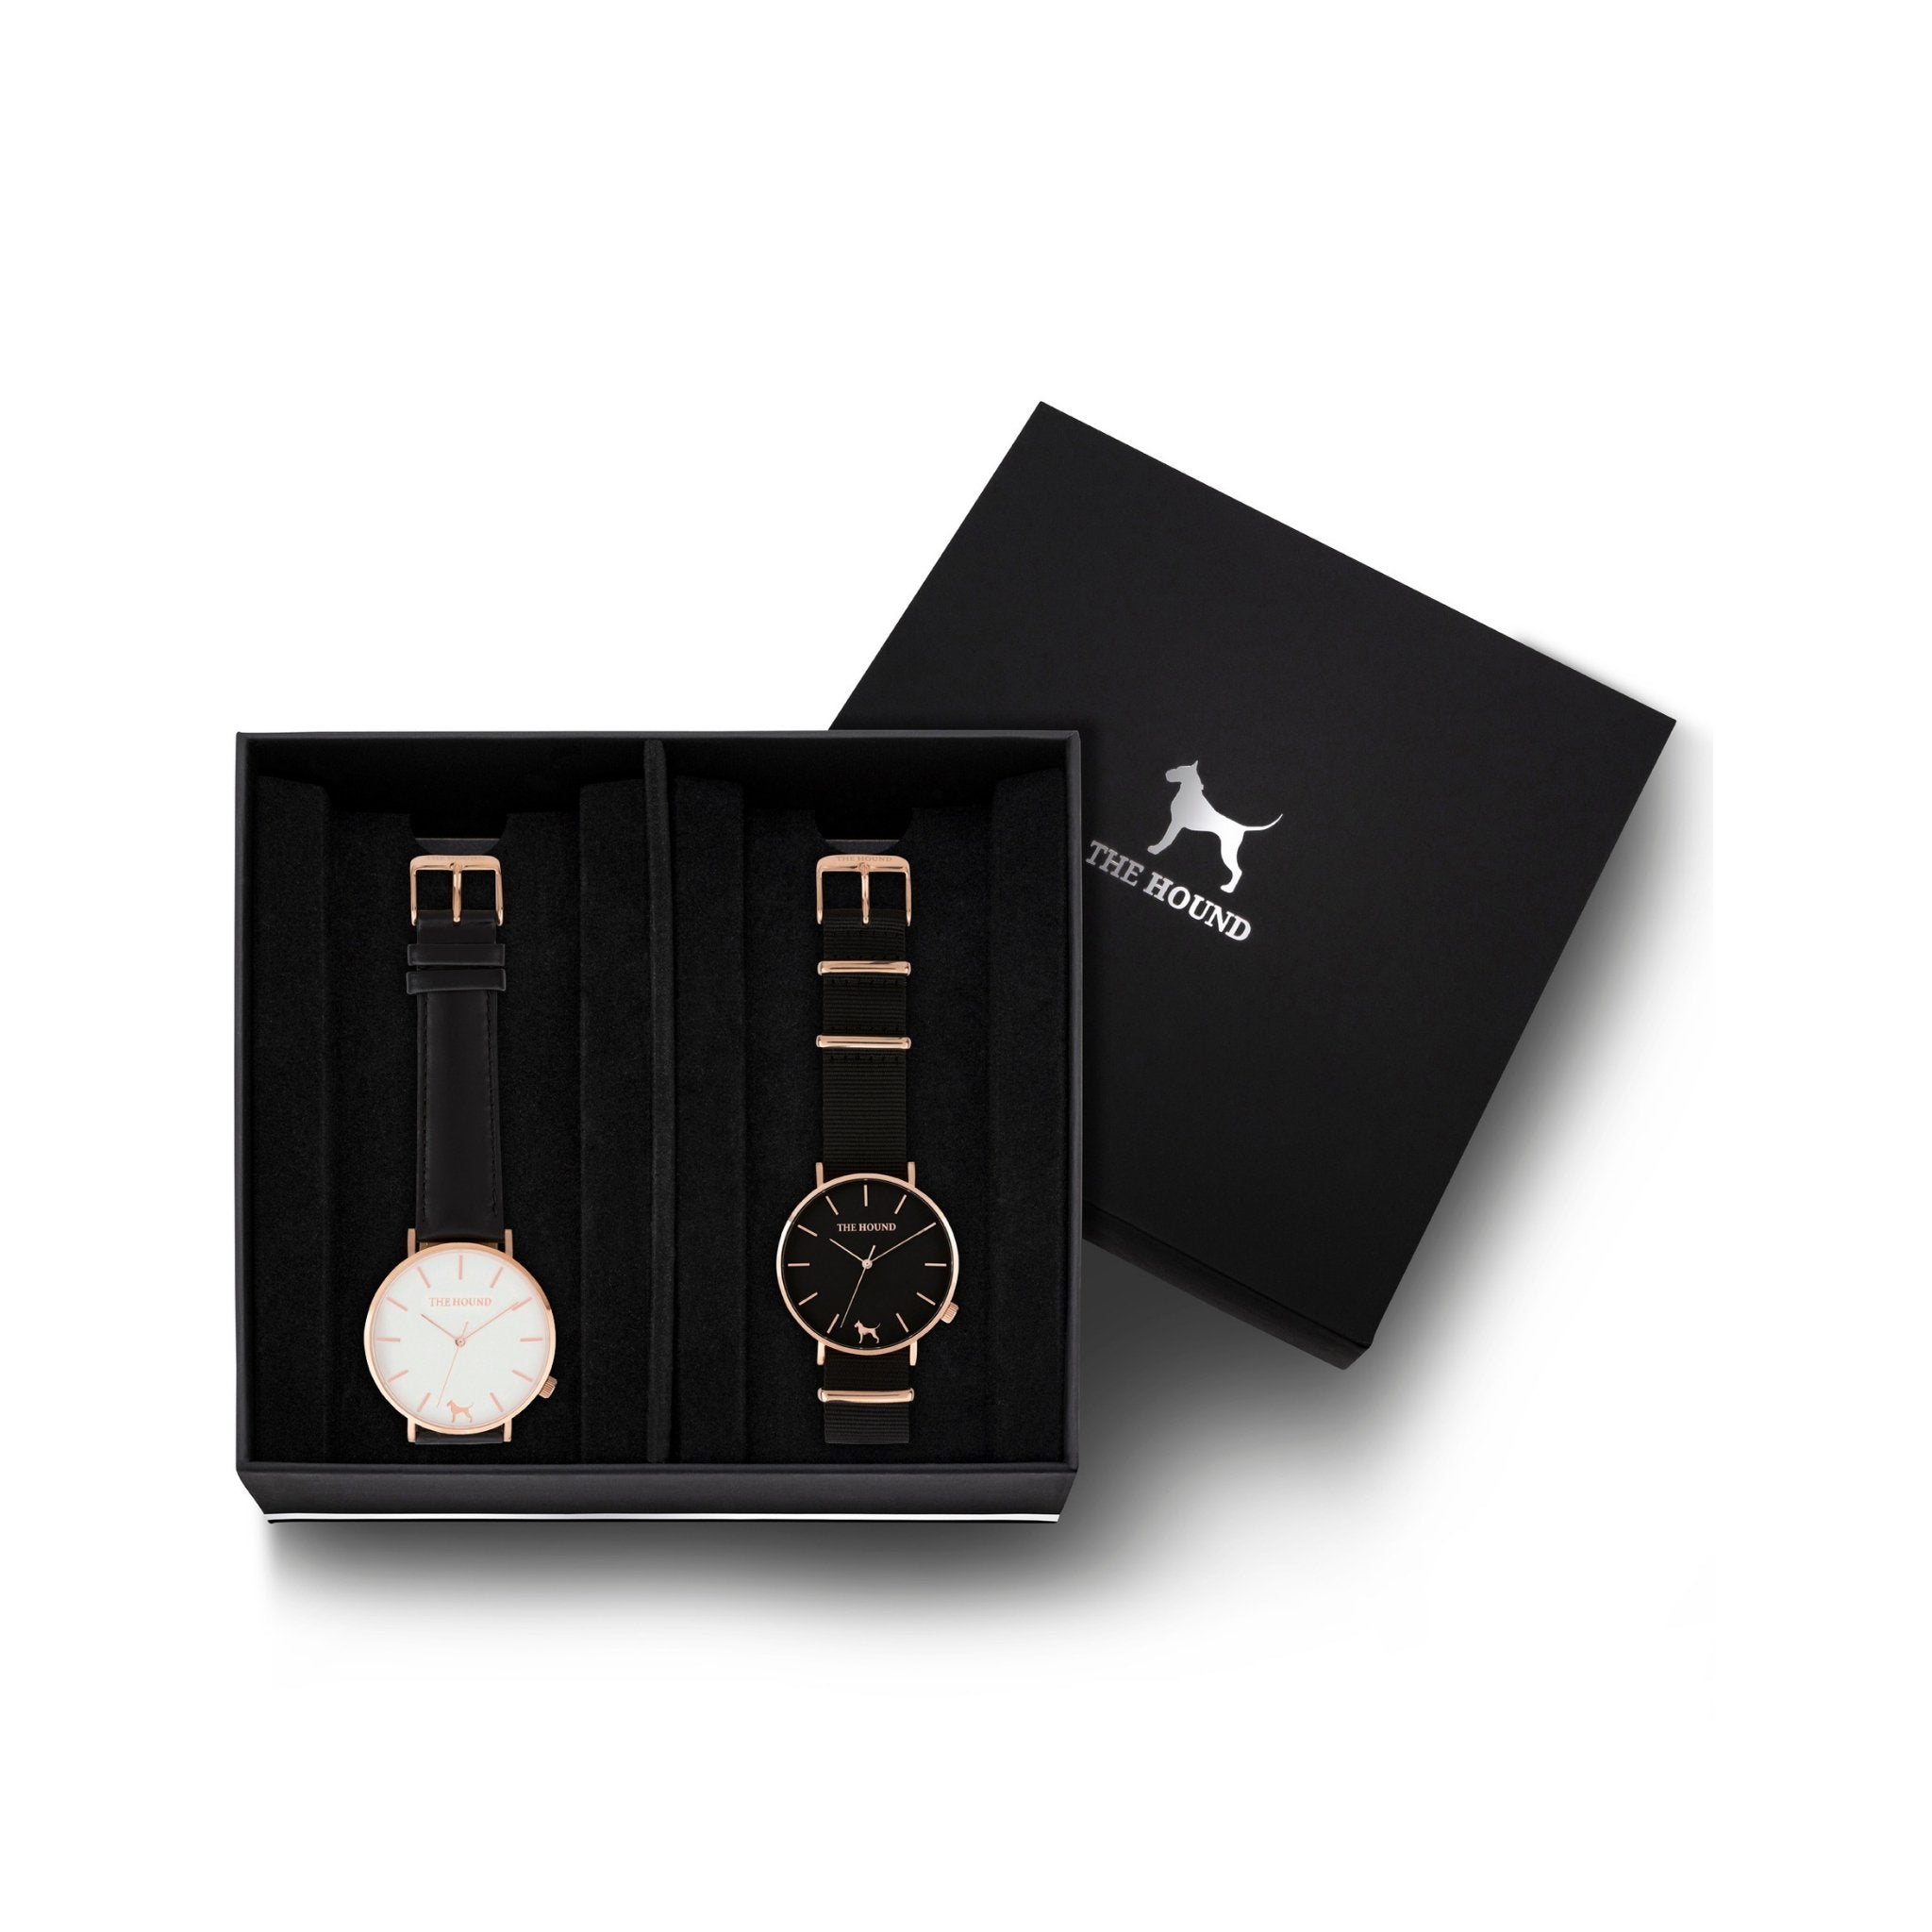 Custom gift set - Rose gold and white watch with stitched black genuine leather band and a rose gold and black watch with black nato leather band